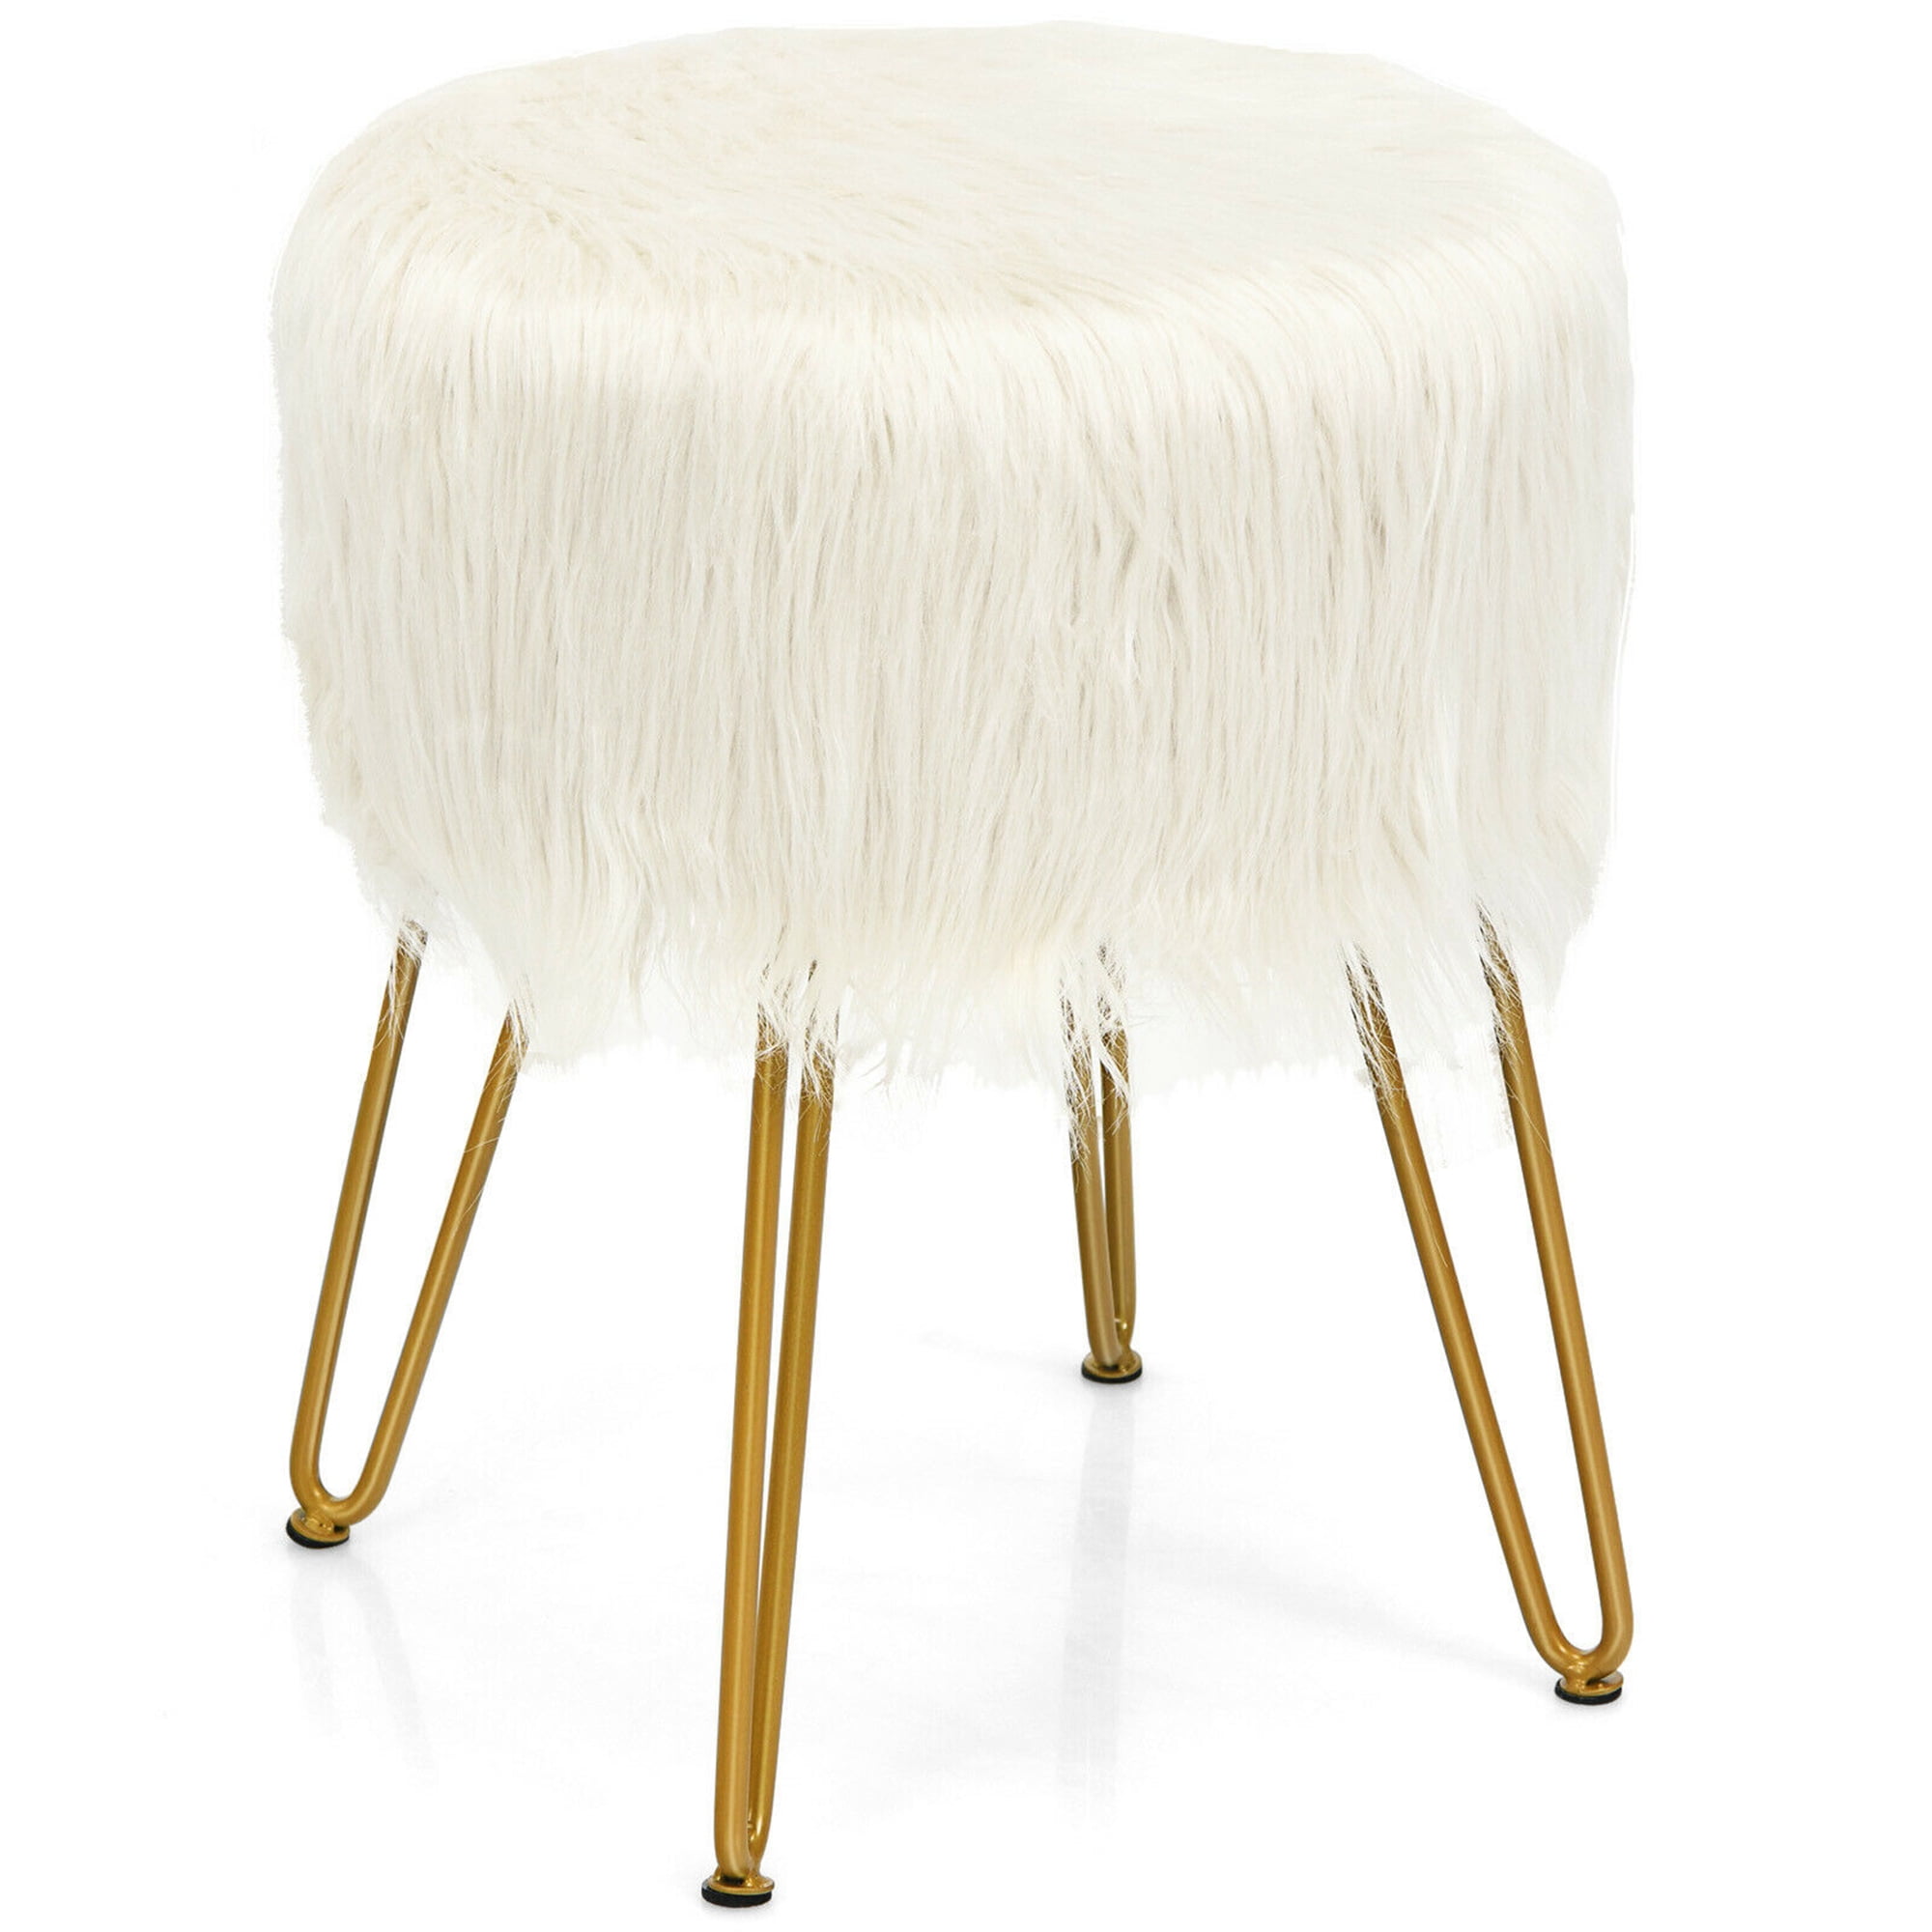 Modern Pink Fluffy Sitting Stool or Foot Stool Ottoman Pouffe with Padded Seat 